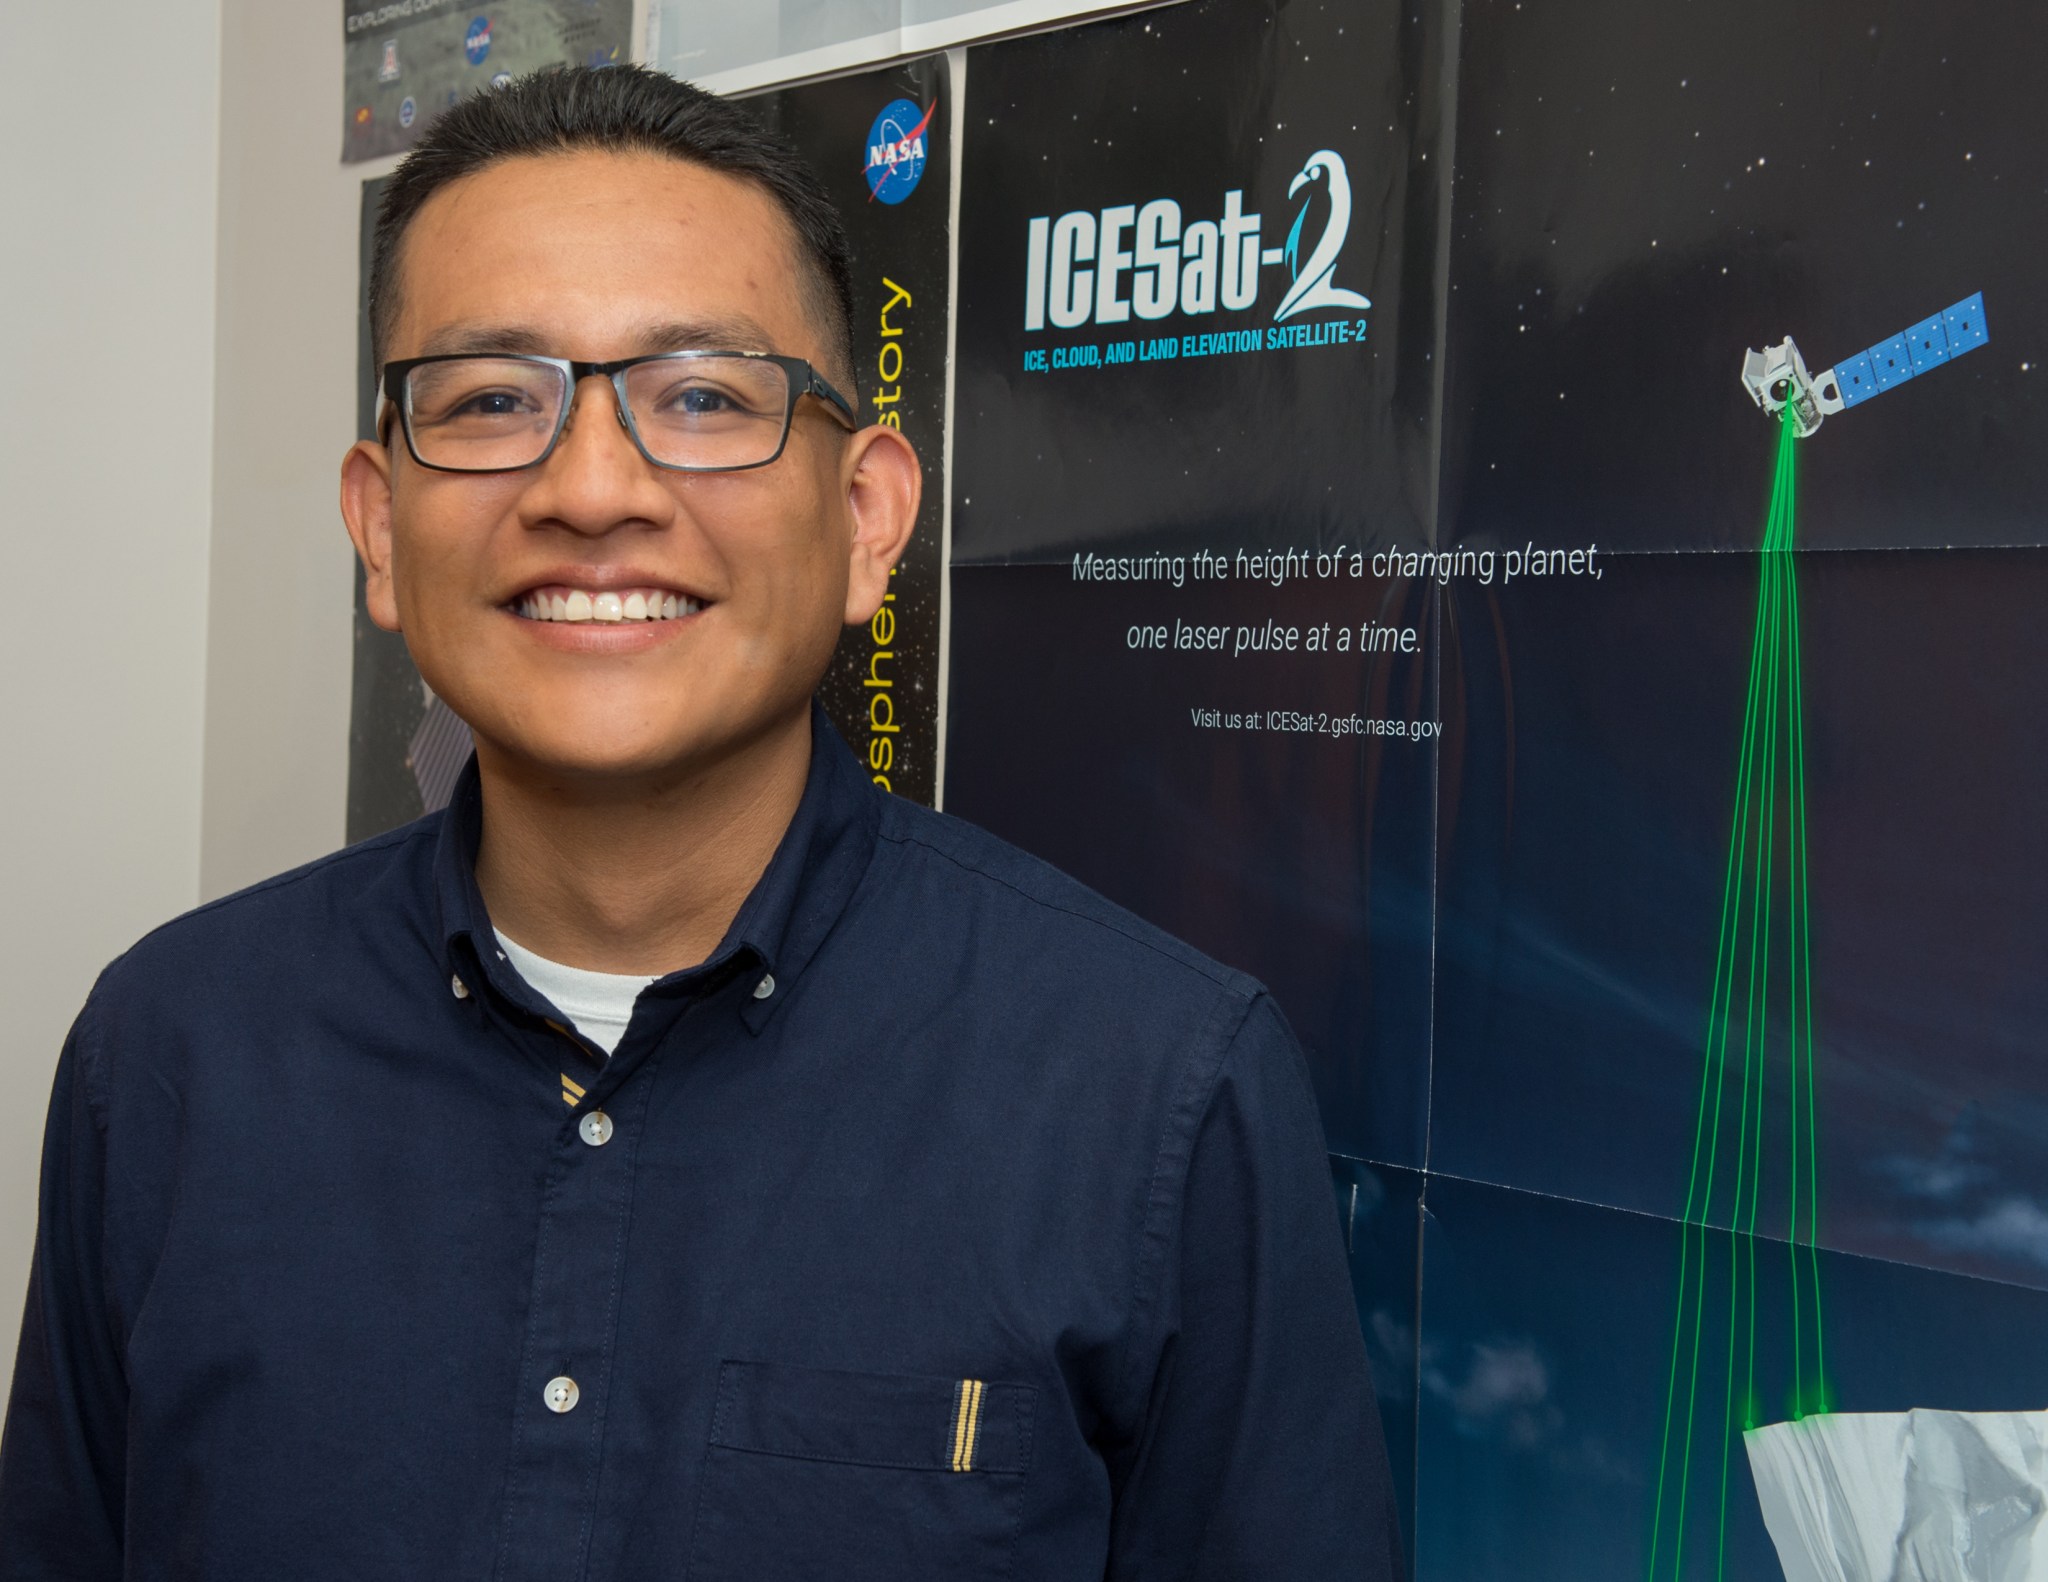 Native American man with black hair and tan skin wears glasses and a navy dress shirt. He stands in front of a poster that says "ICESat 2" with a satellite with green lasers beaming down. 